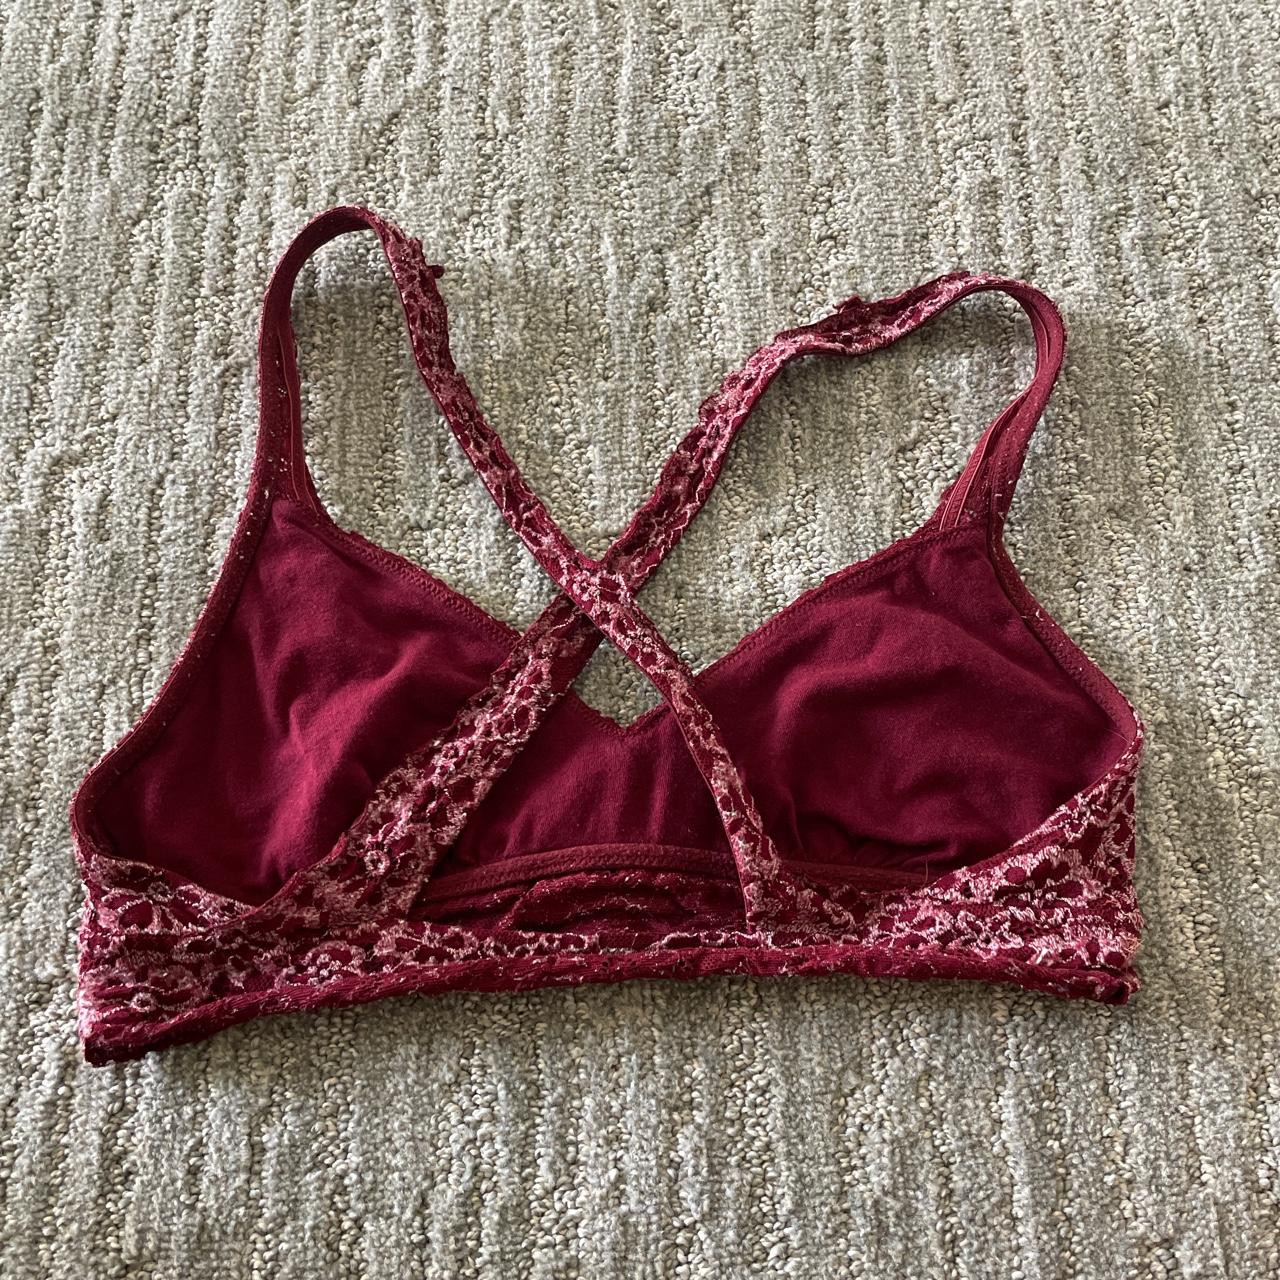 Large lacy red/wine/concord Aerie bralette #aerie - Depop